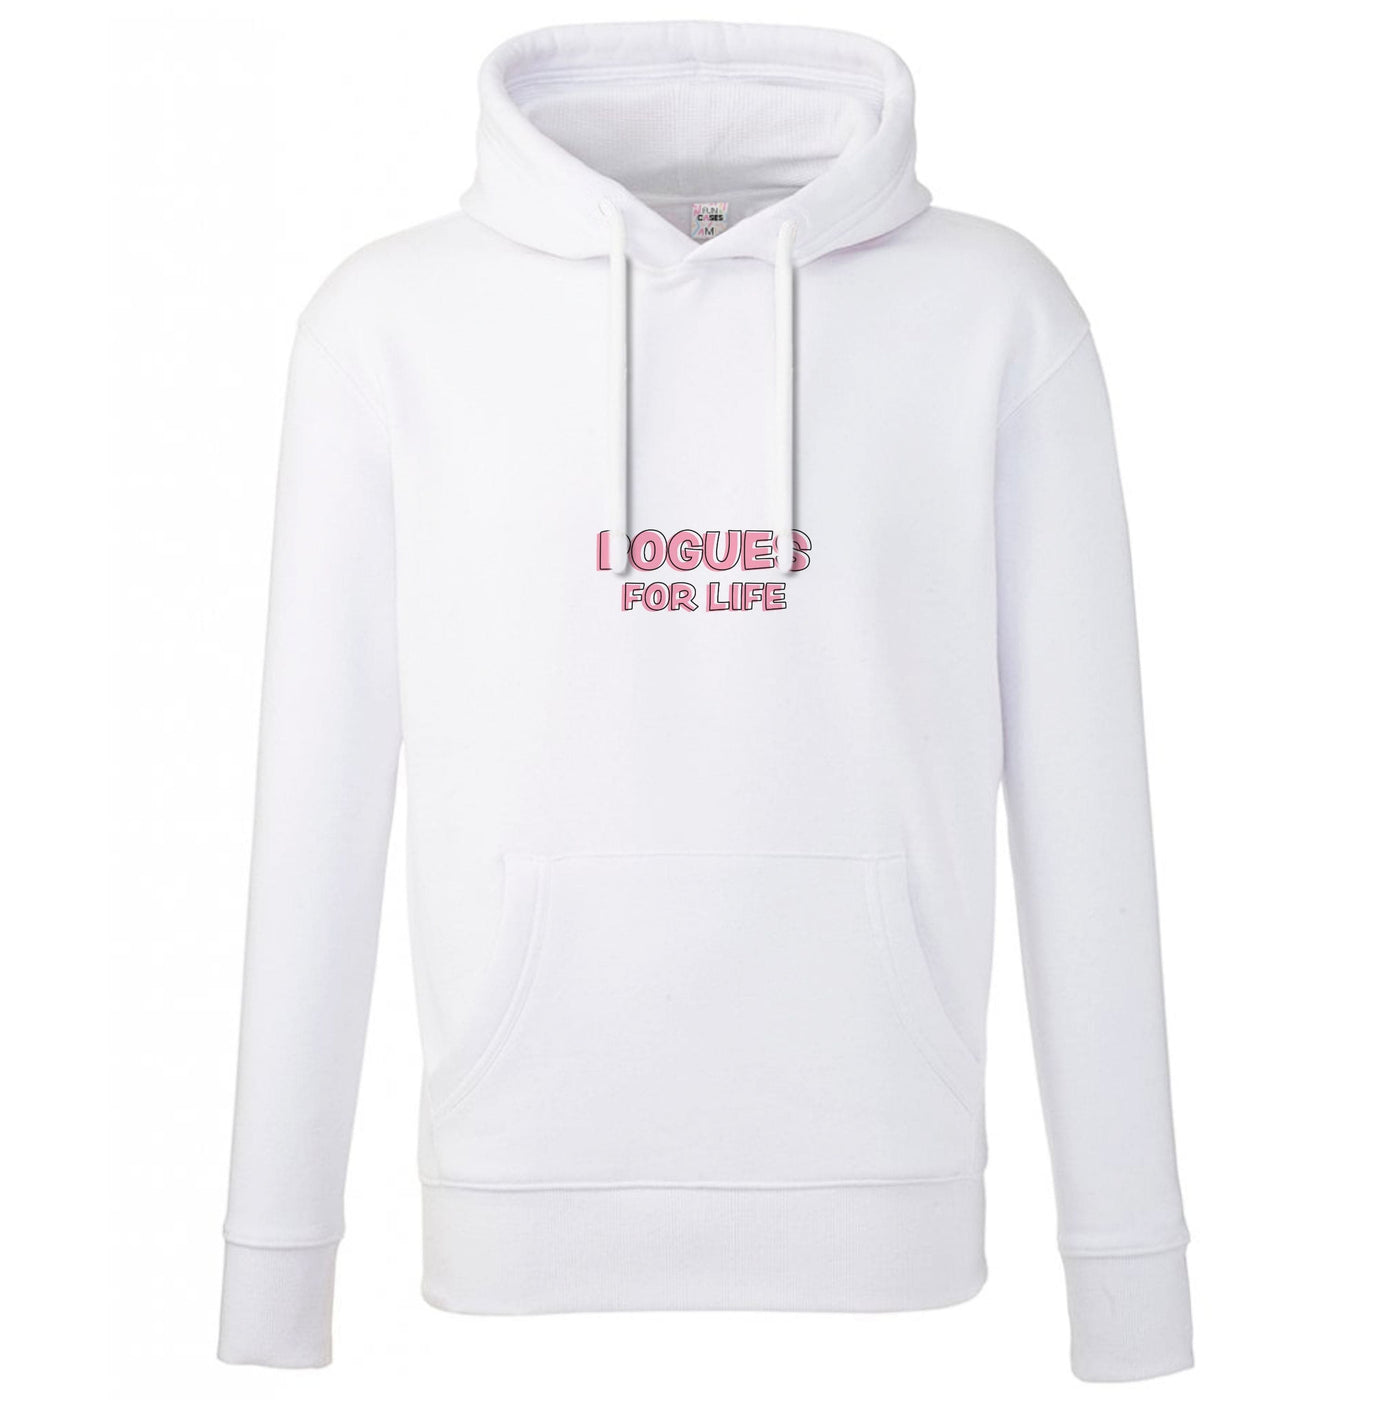 Pogues For Life - Outer Banks Hoodie